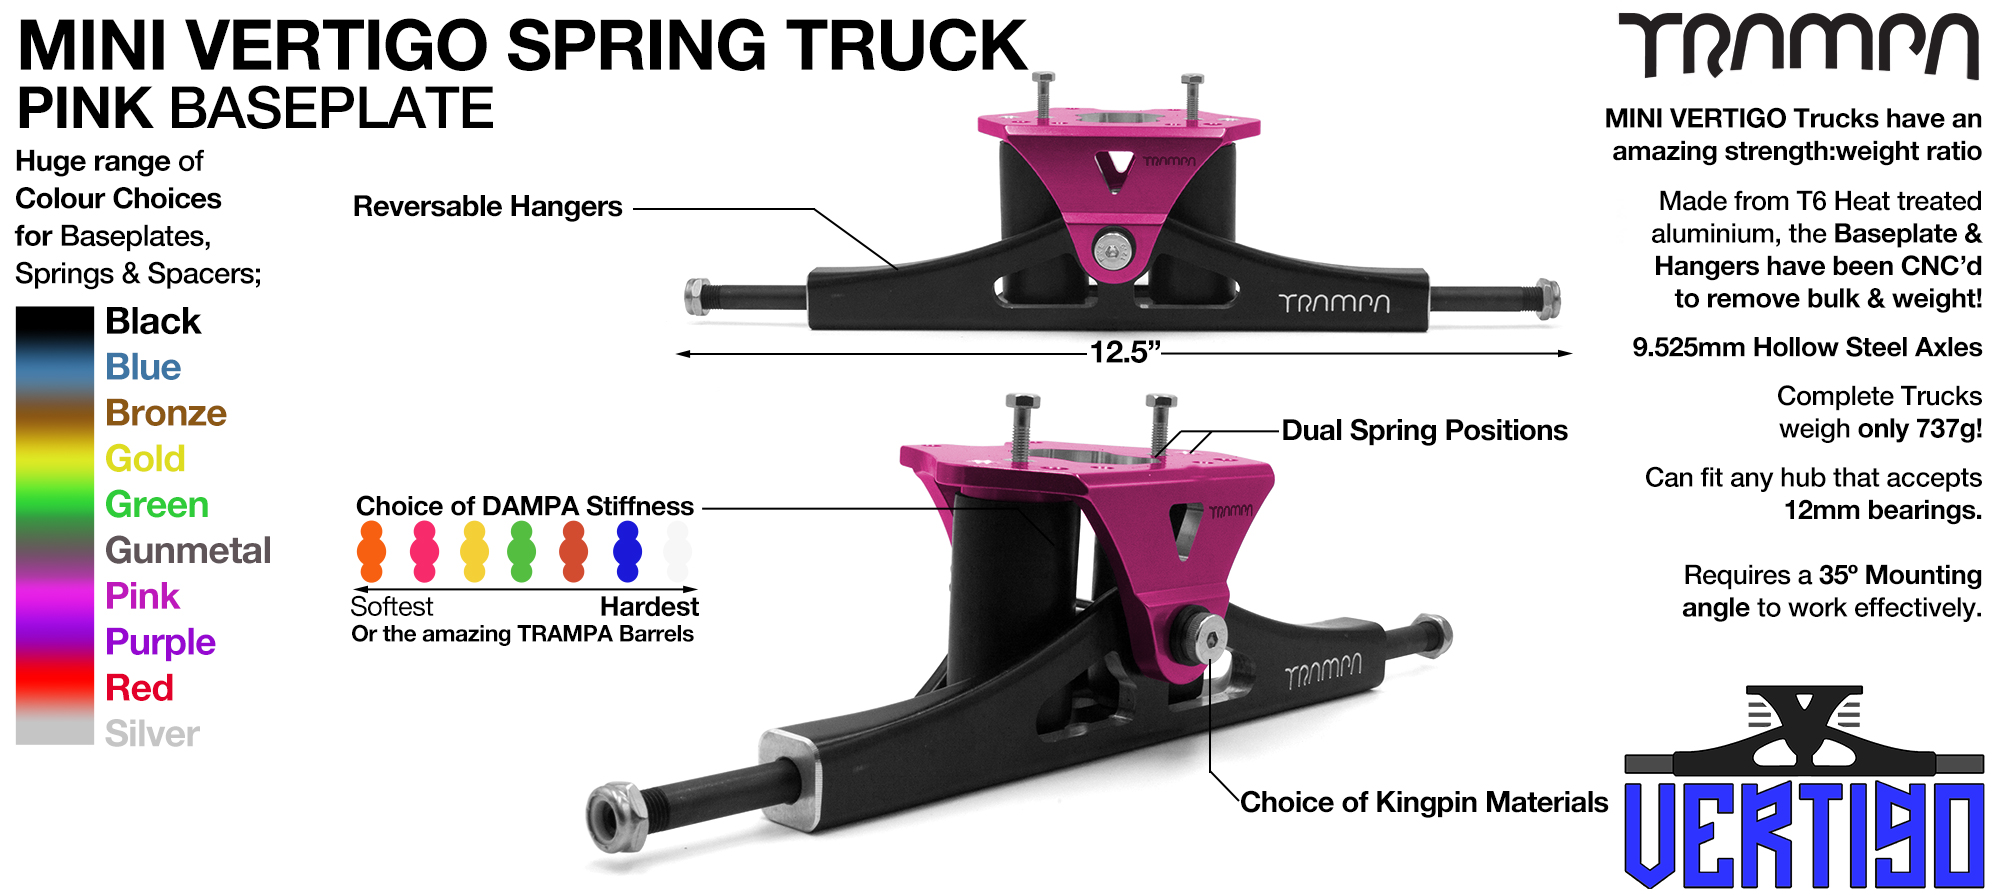 Mini VERTIGO TRAMPA TRUCKS - CNC FORGED Channel Hanger with 9.525mm HOLLOW Steel Axle CNC Baseplate Stainless Steel Kingpin - PINK